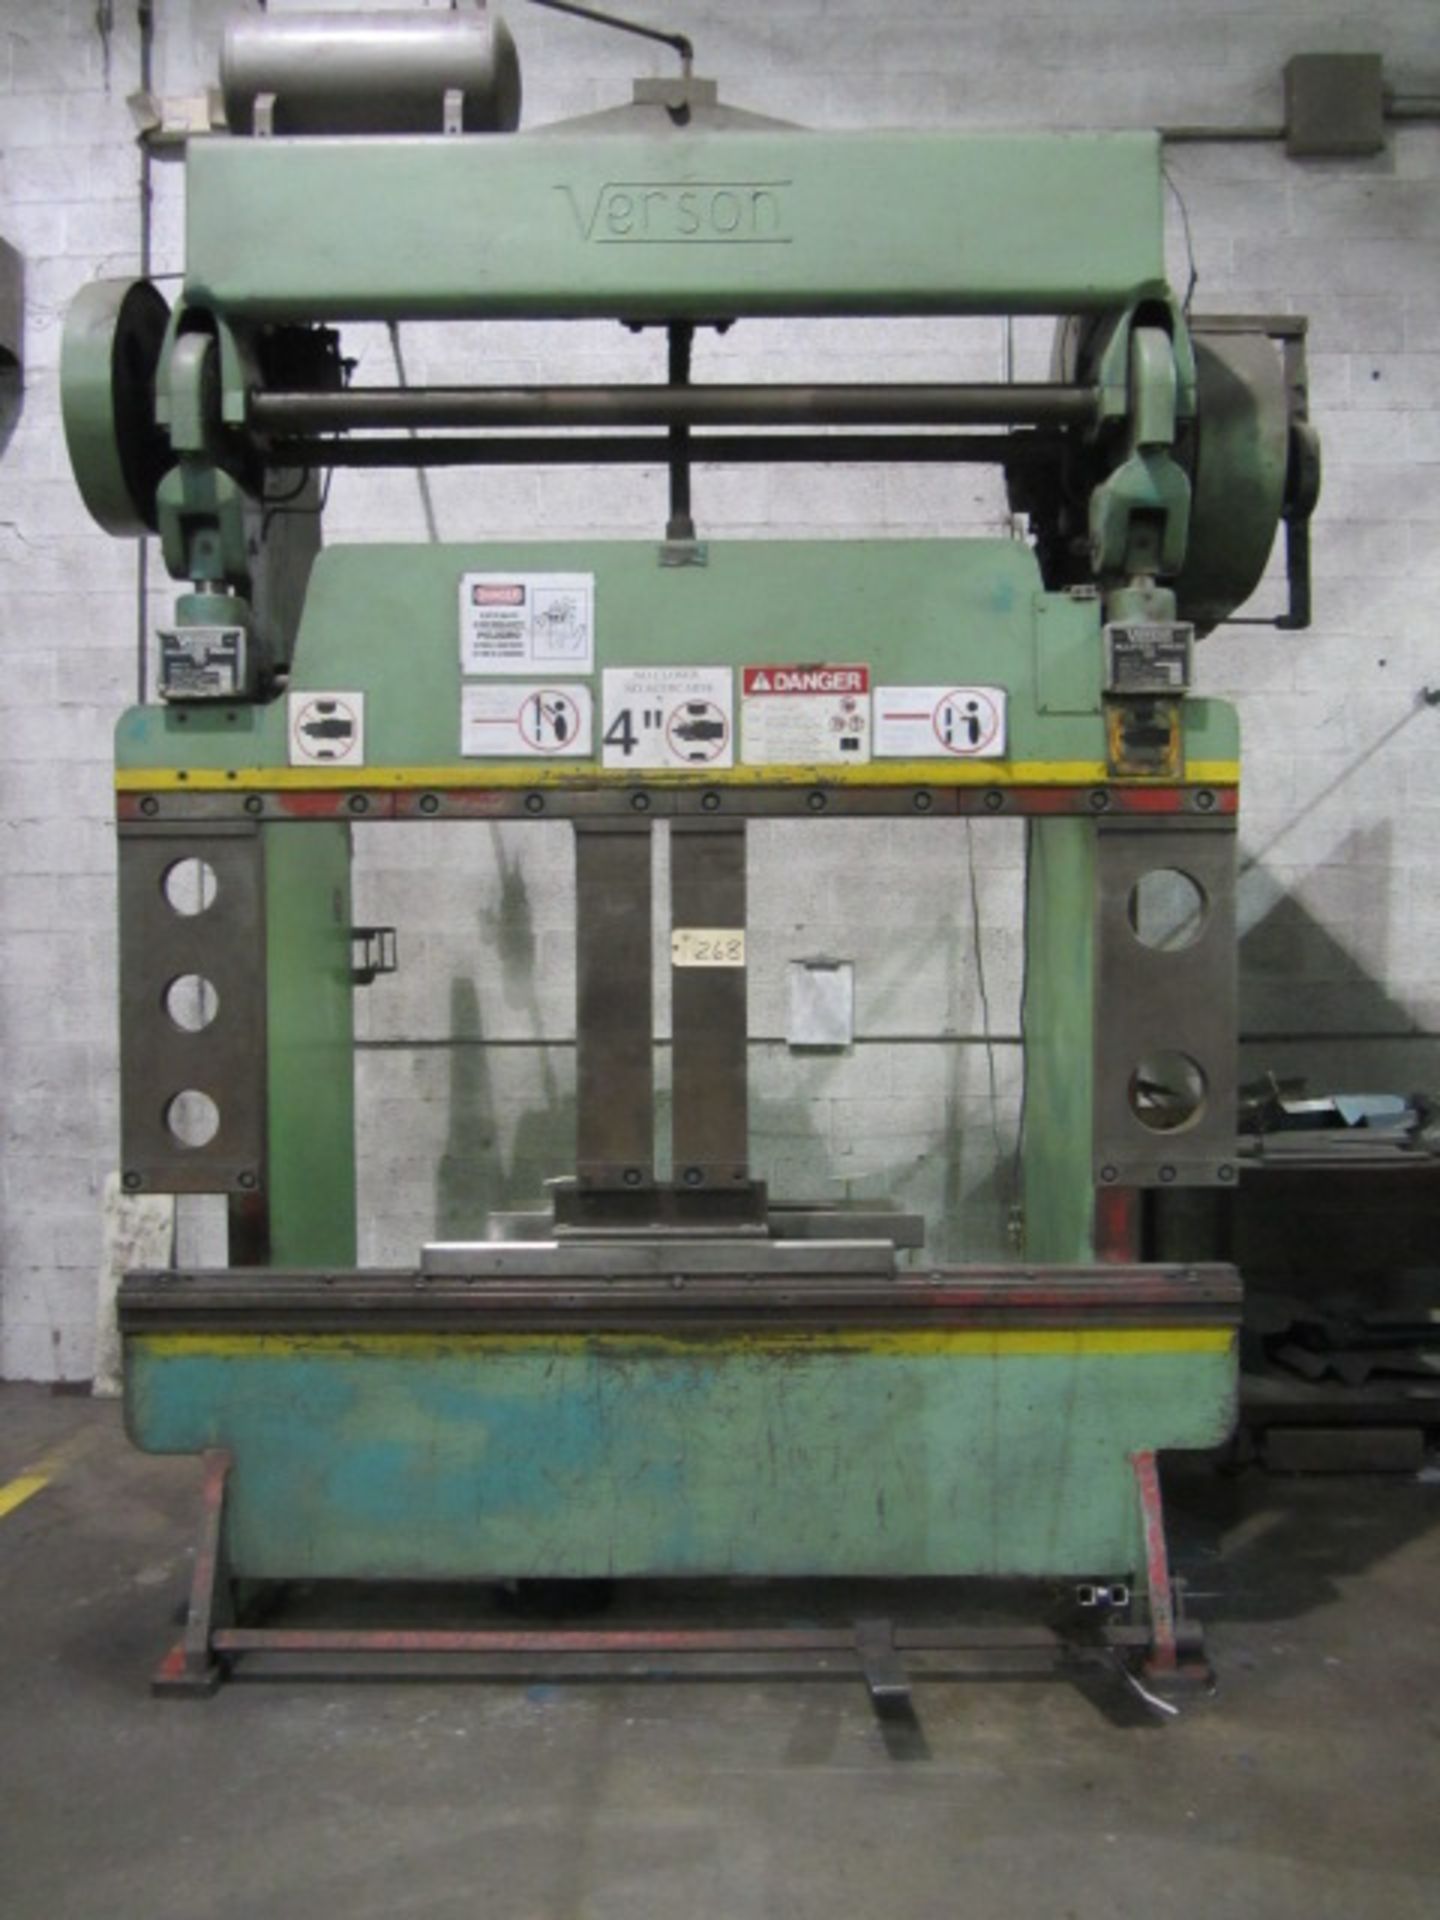 Verson 60 Ton x 8' Special Press Brake for Deep Reach, 40'' Shut Height, 3'' Stroke, 4'' Adjustment, - Image 5 of 6